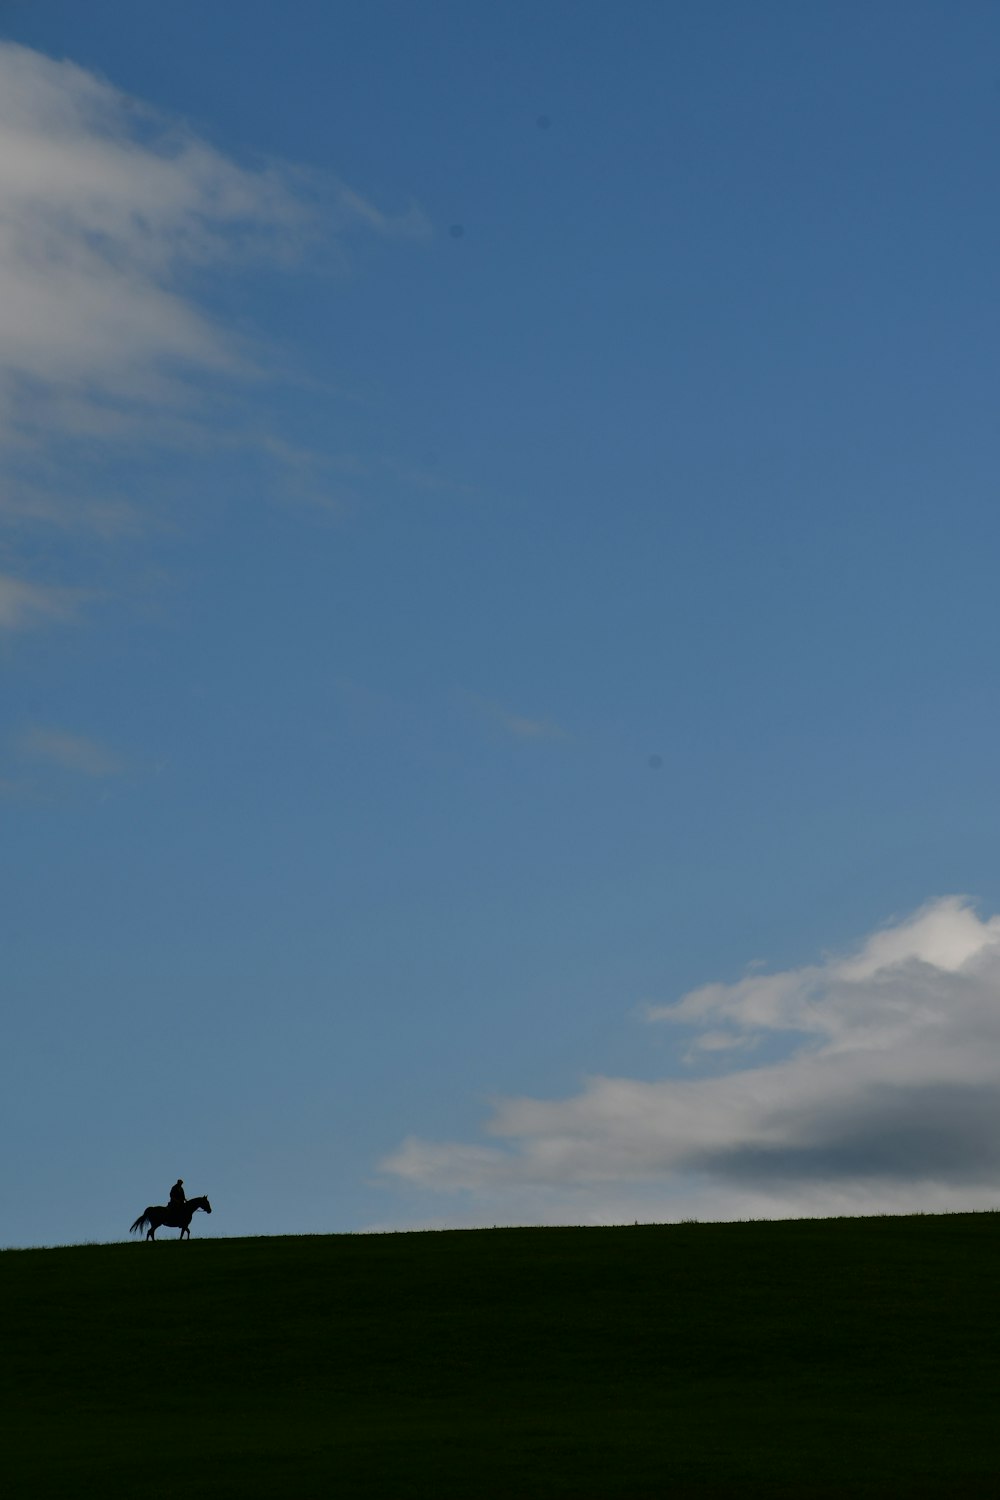 a person riding a horse on a grassy hill